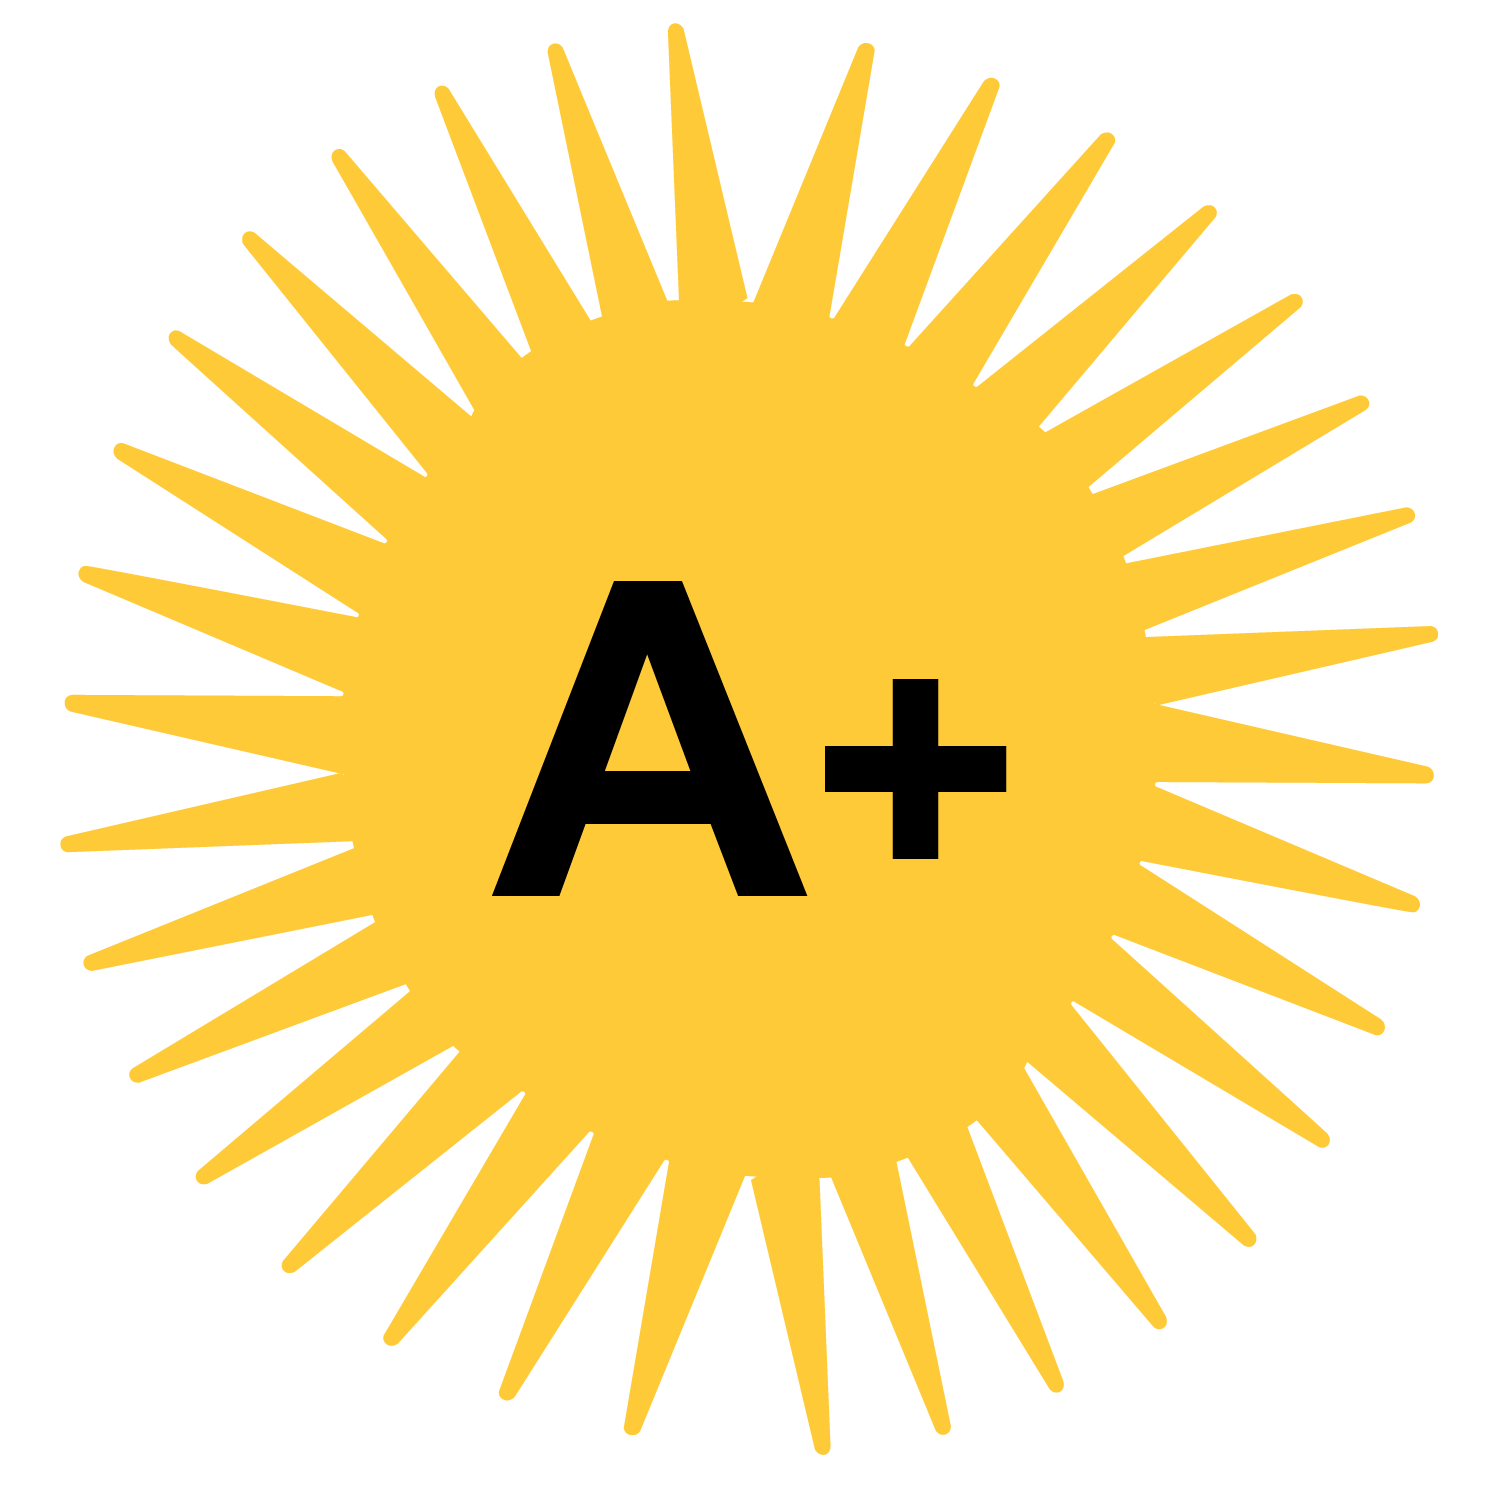 A+ rating in front of the ASU yellow sun